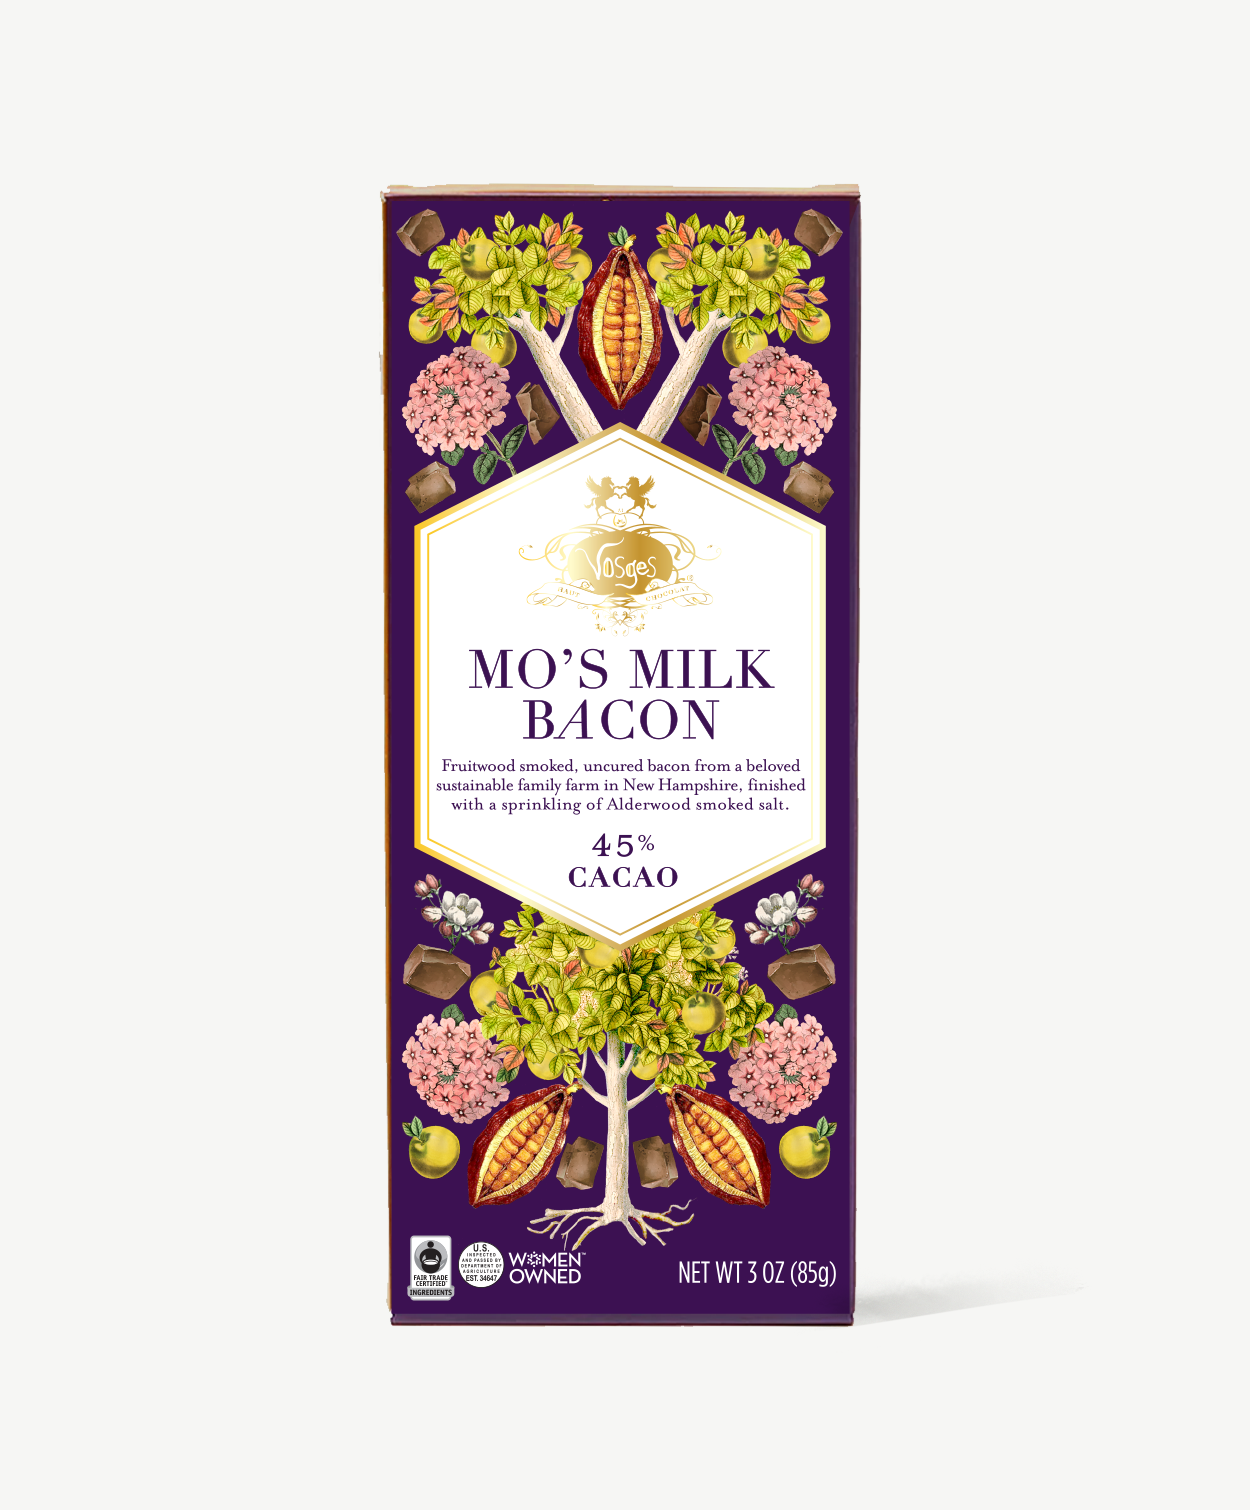 Vosges Mo's Milk Chocolate Bacon bar stands upright displaying a purple box  featuring illustrations of cherries and cheese on a grey background.